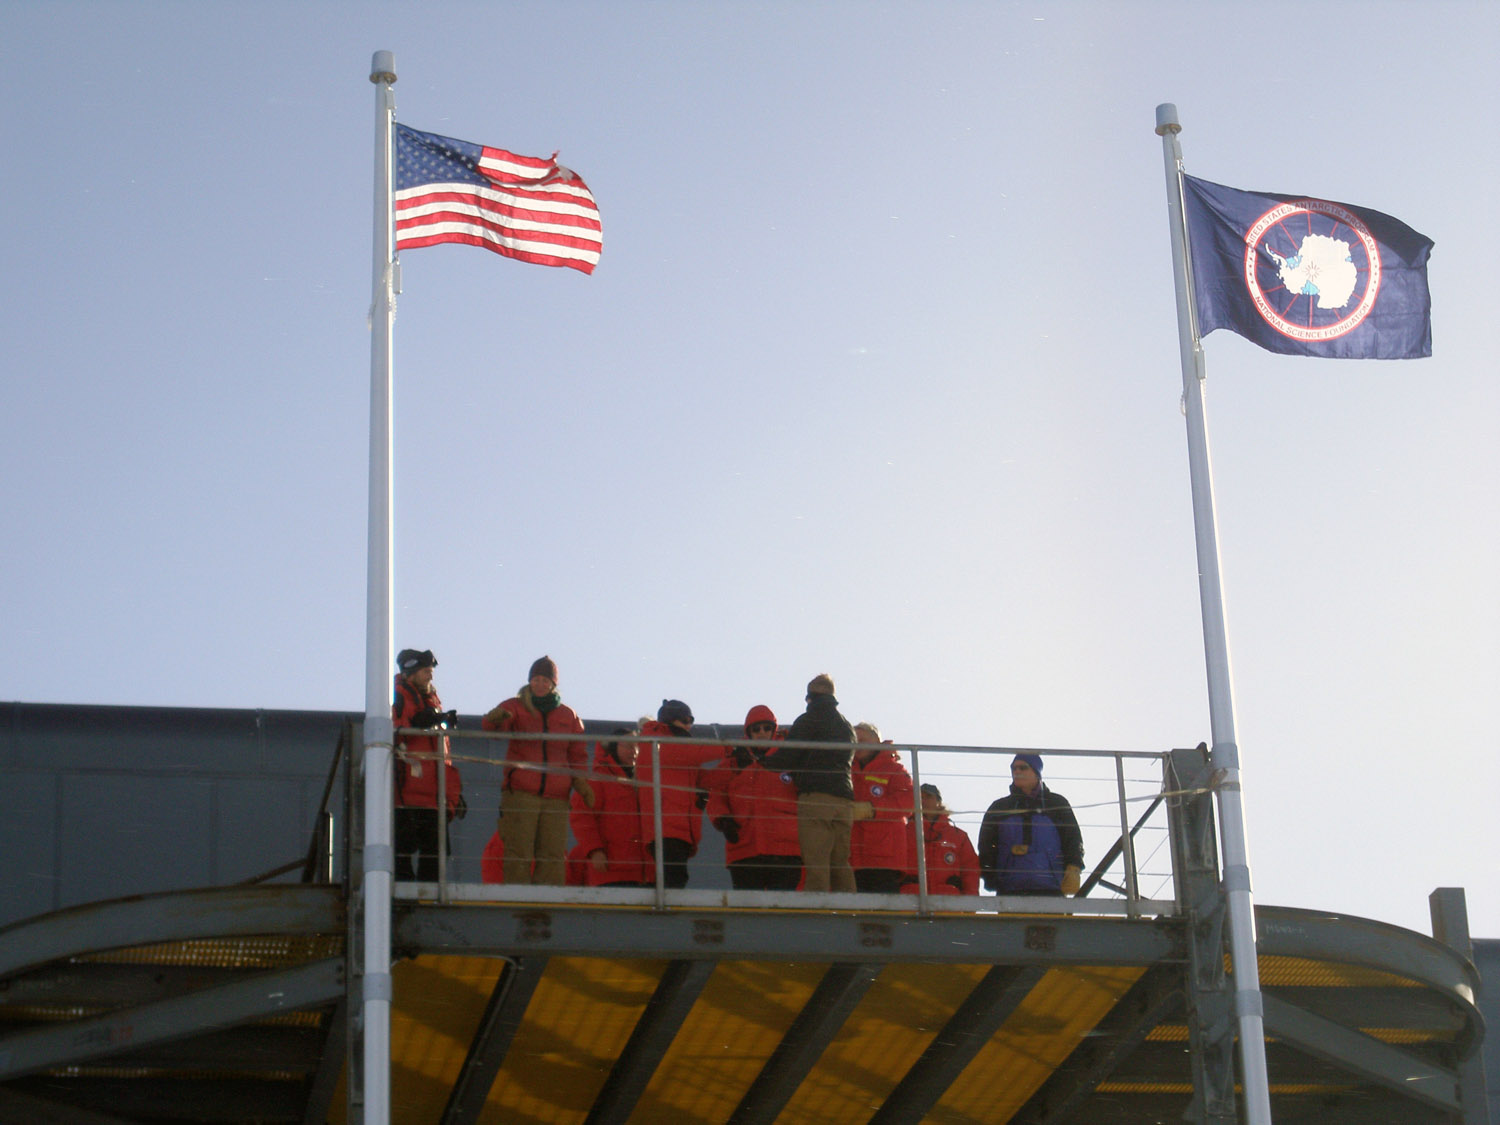 South Pole Station- Dedication and Raising Flags over New Station